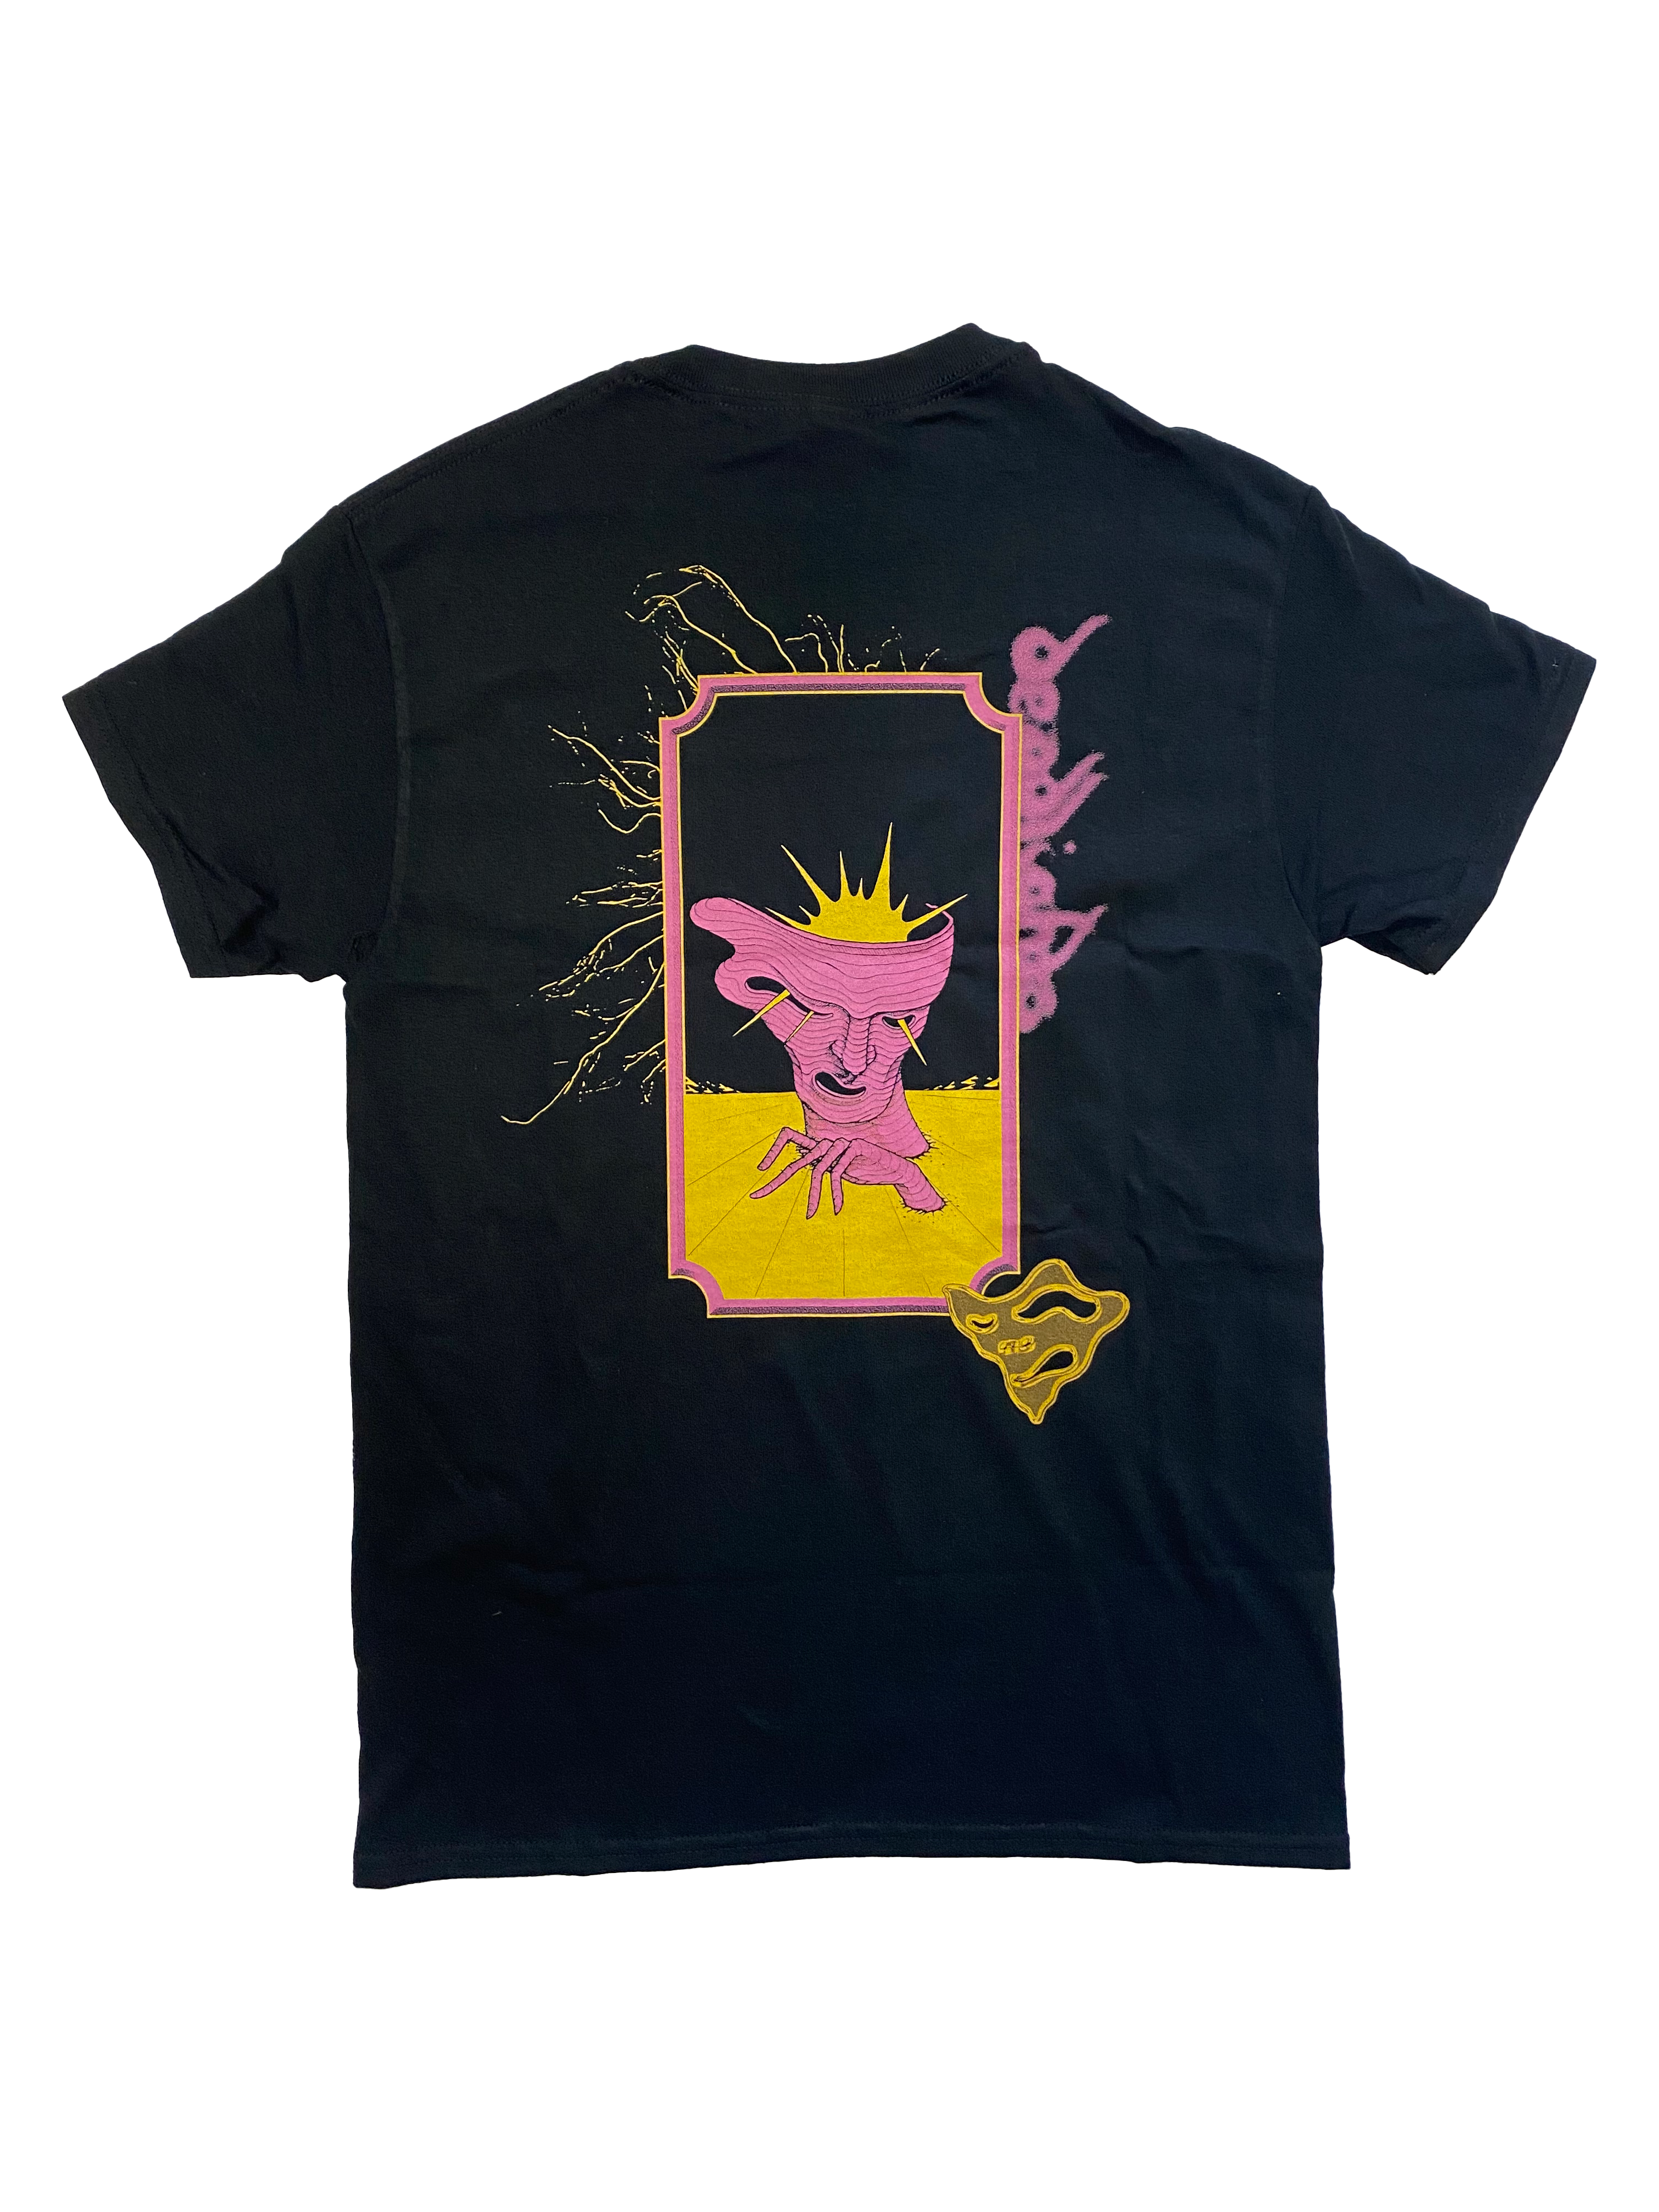 Deadlights - The Uncanny Valley T-Shirt